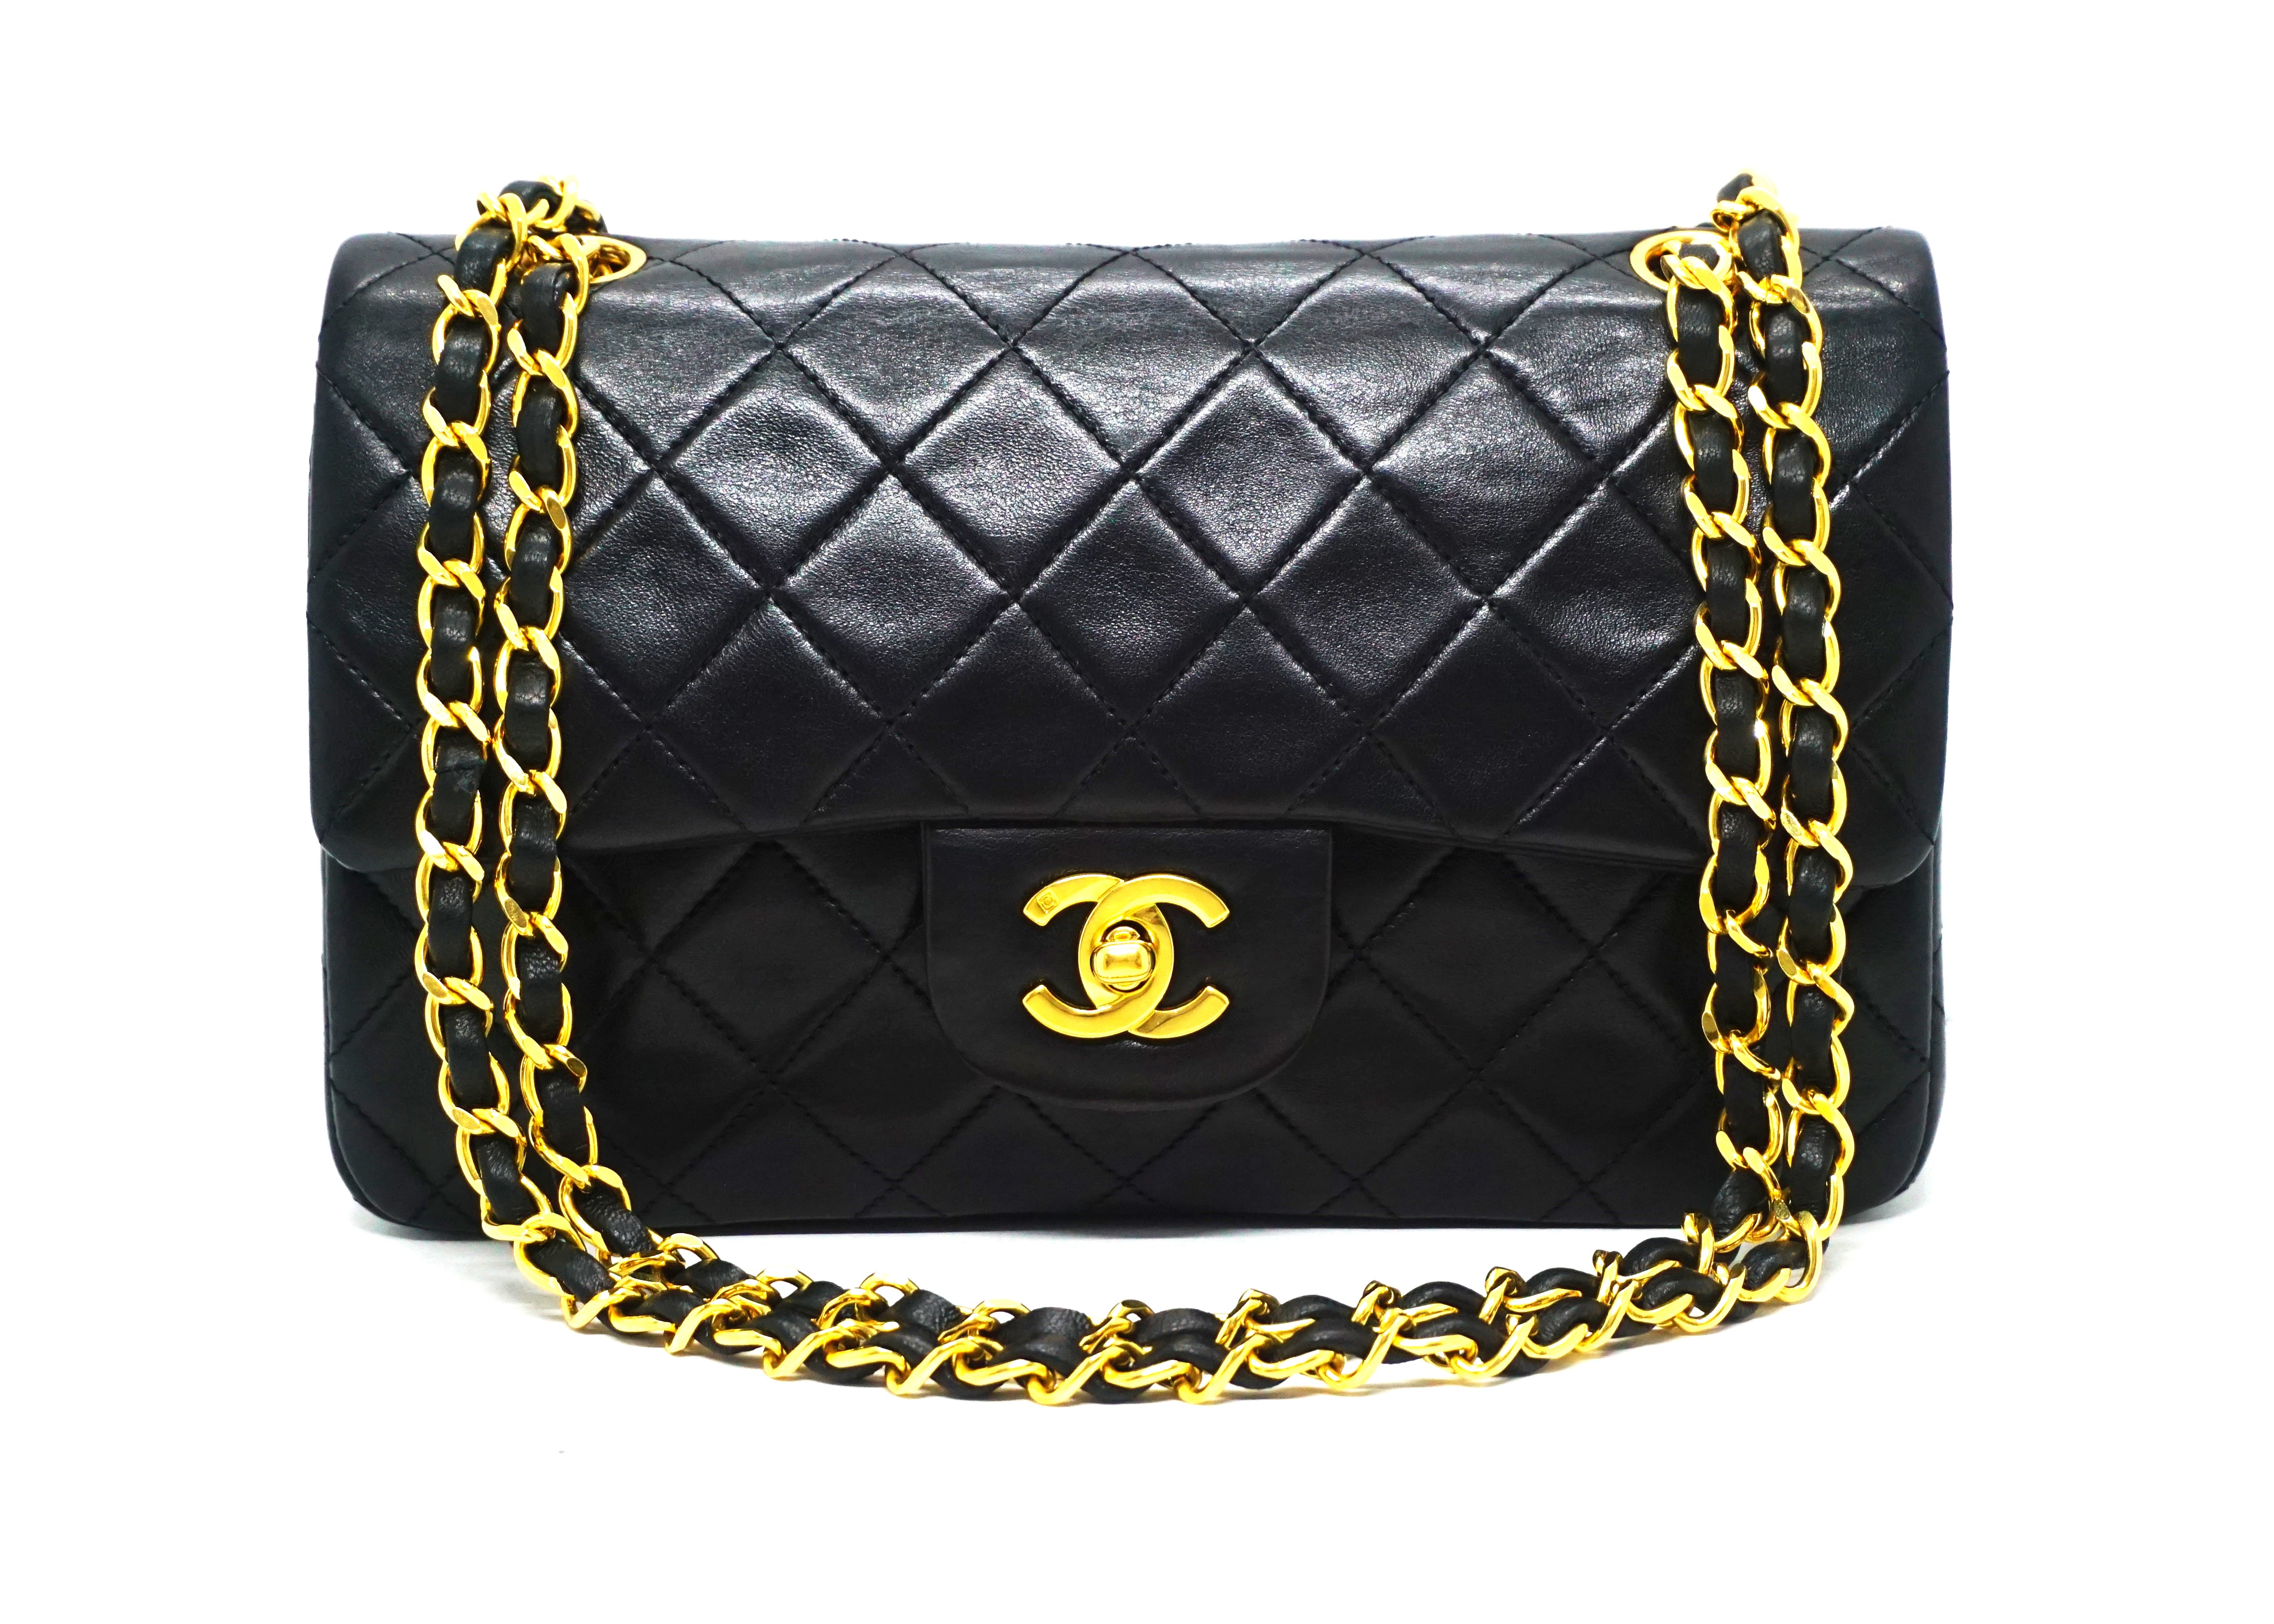 AUTHENTICATED CHANEL BLACK QUILTED VTG SMALL CLASSIC DOUBLE FLAP BAG 24K  GOLD